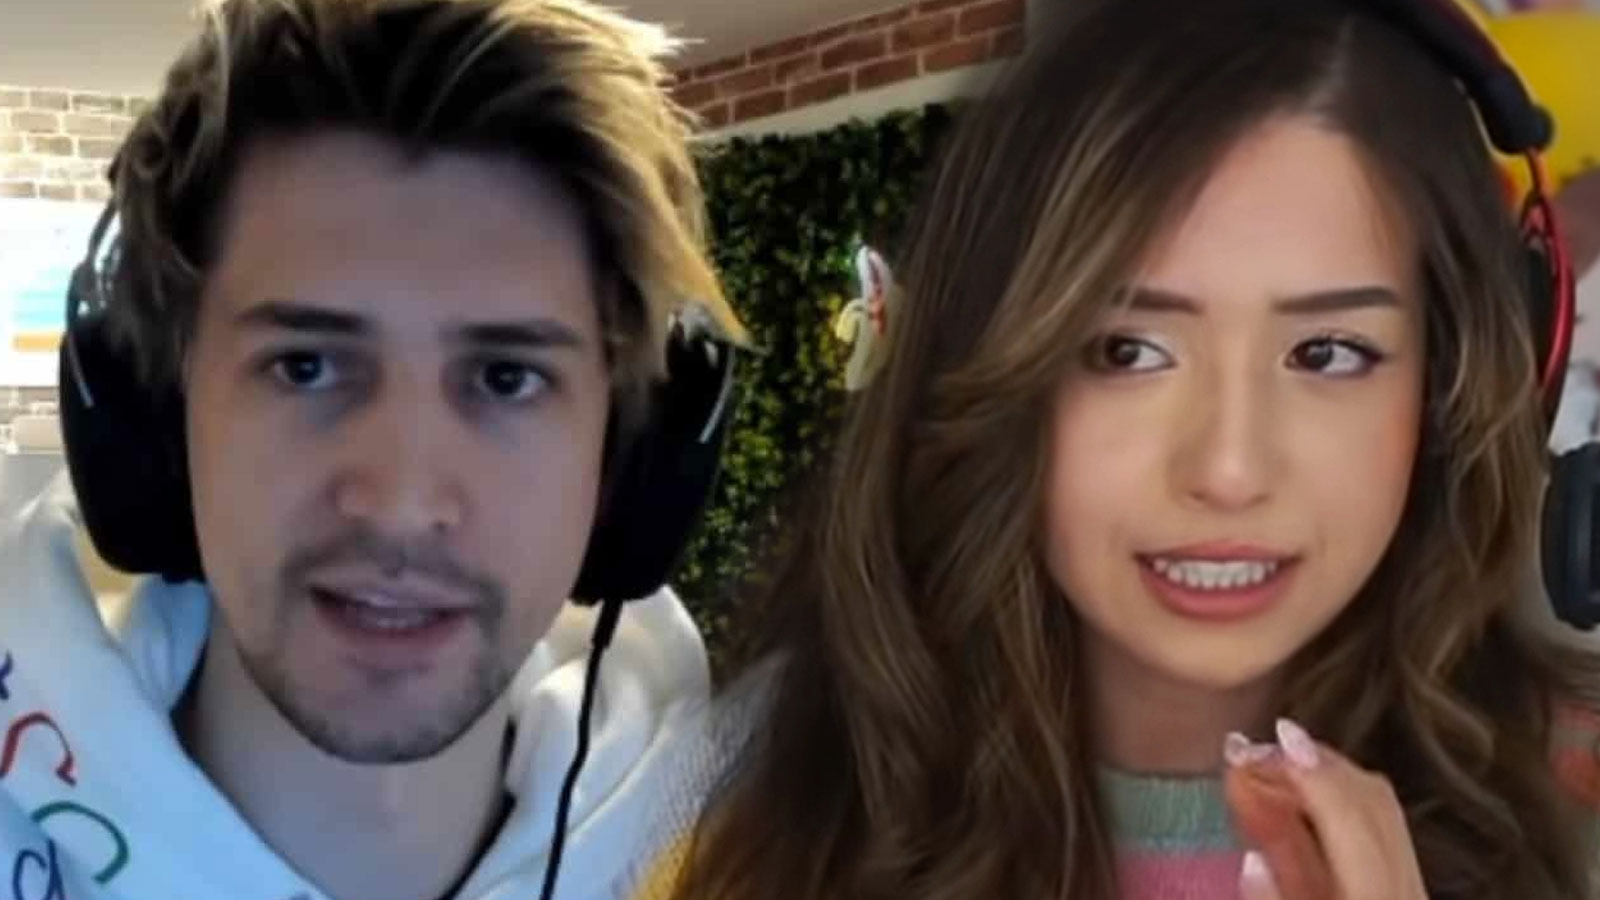 xQc claims Pokimane only spoke out against Twitch gambling for “clout”